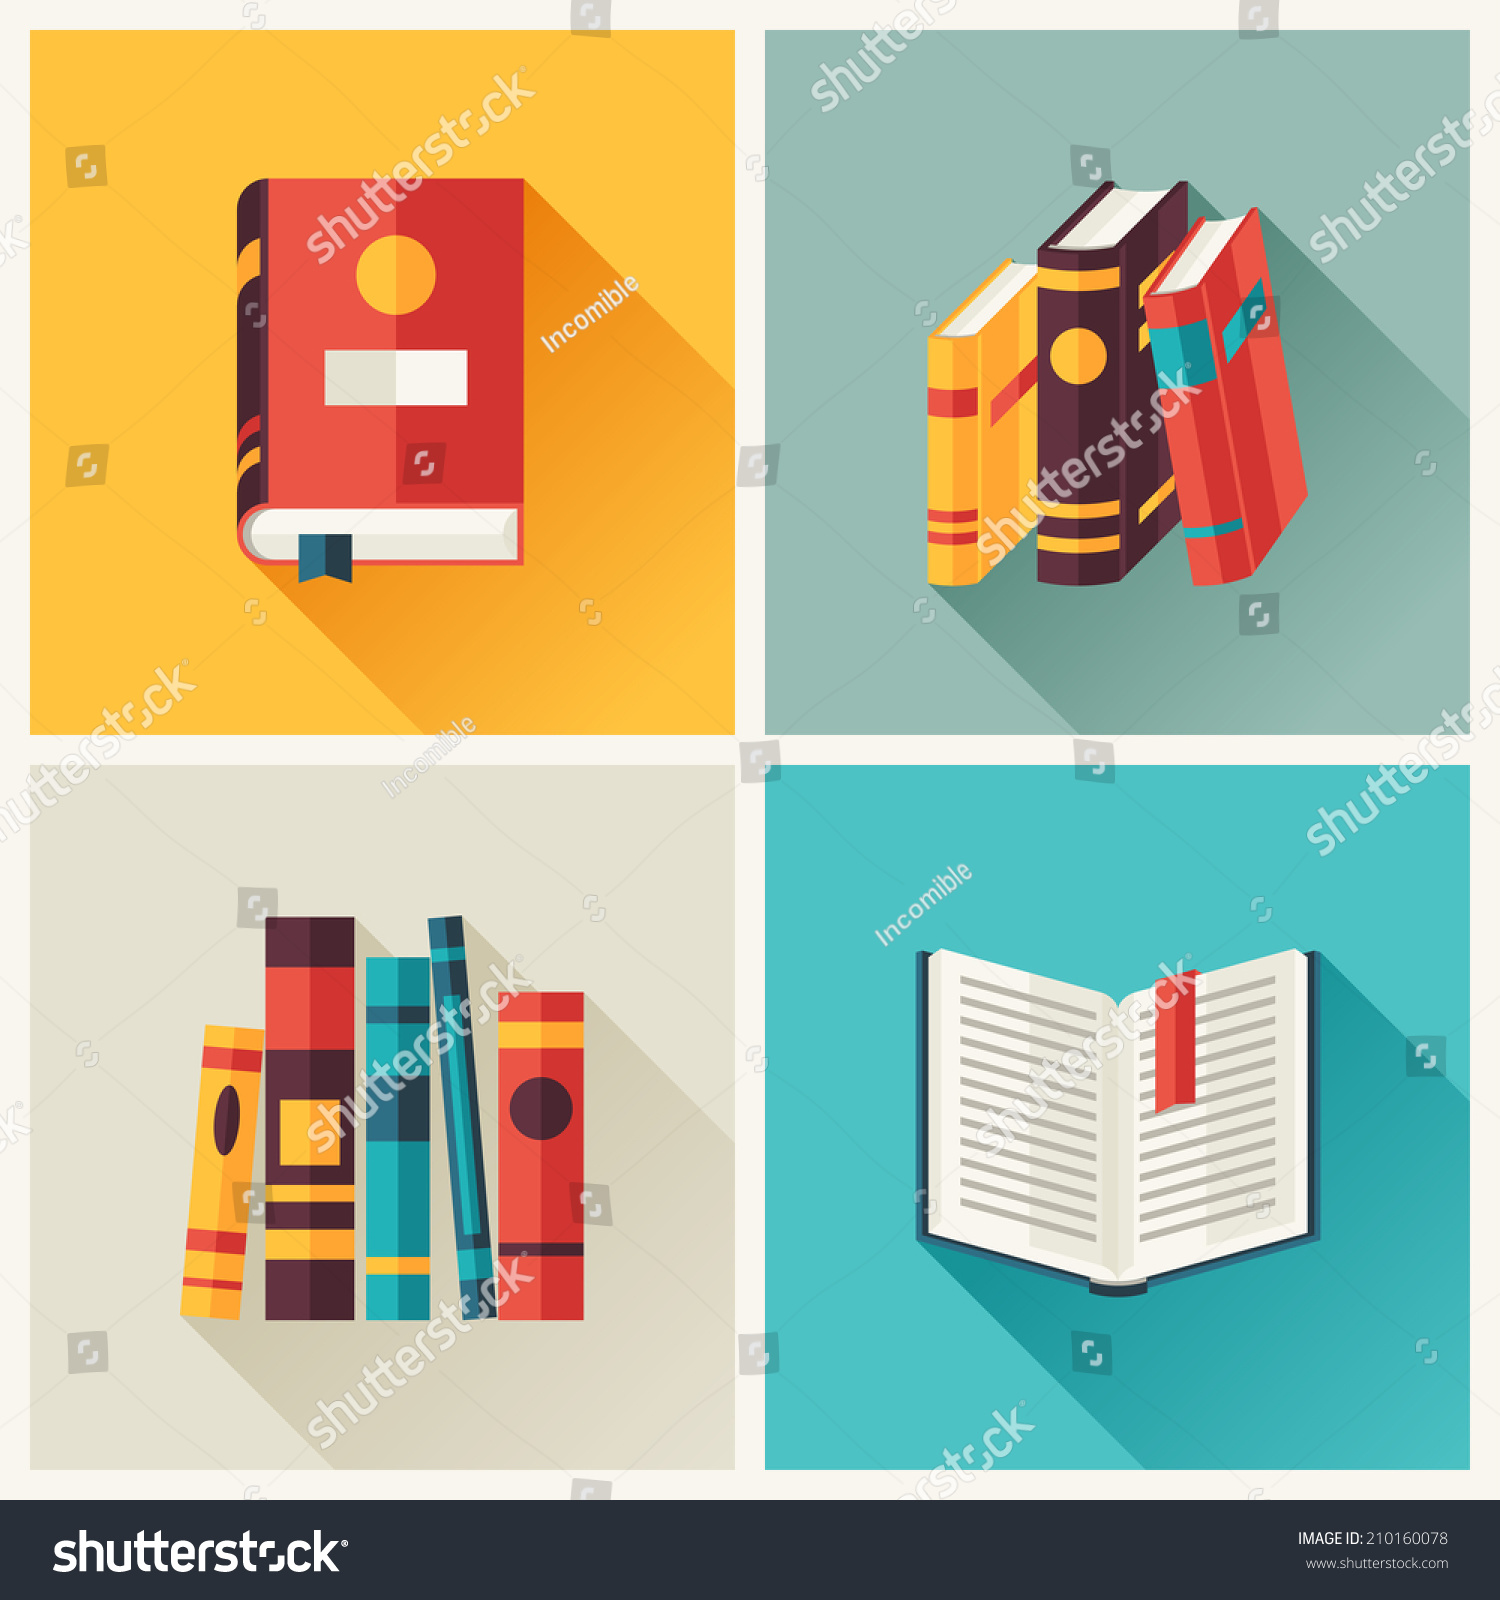 vector free download book - photo #25